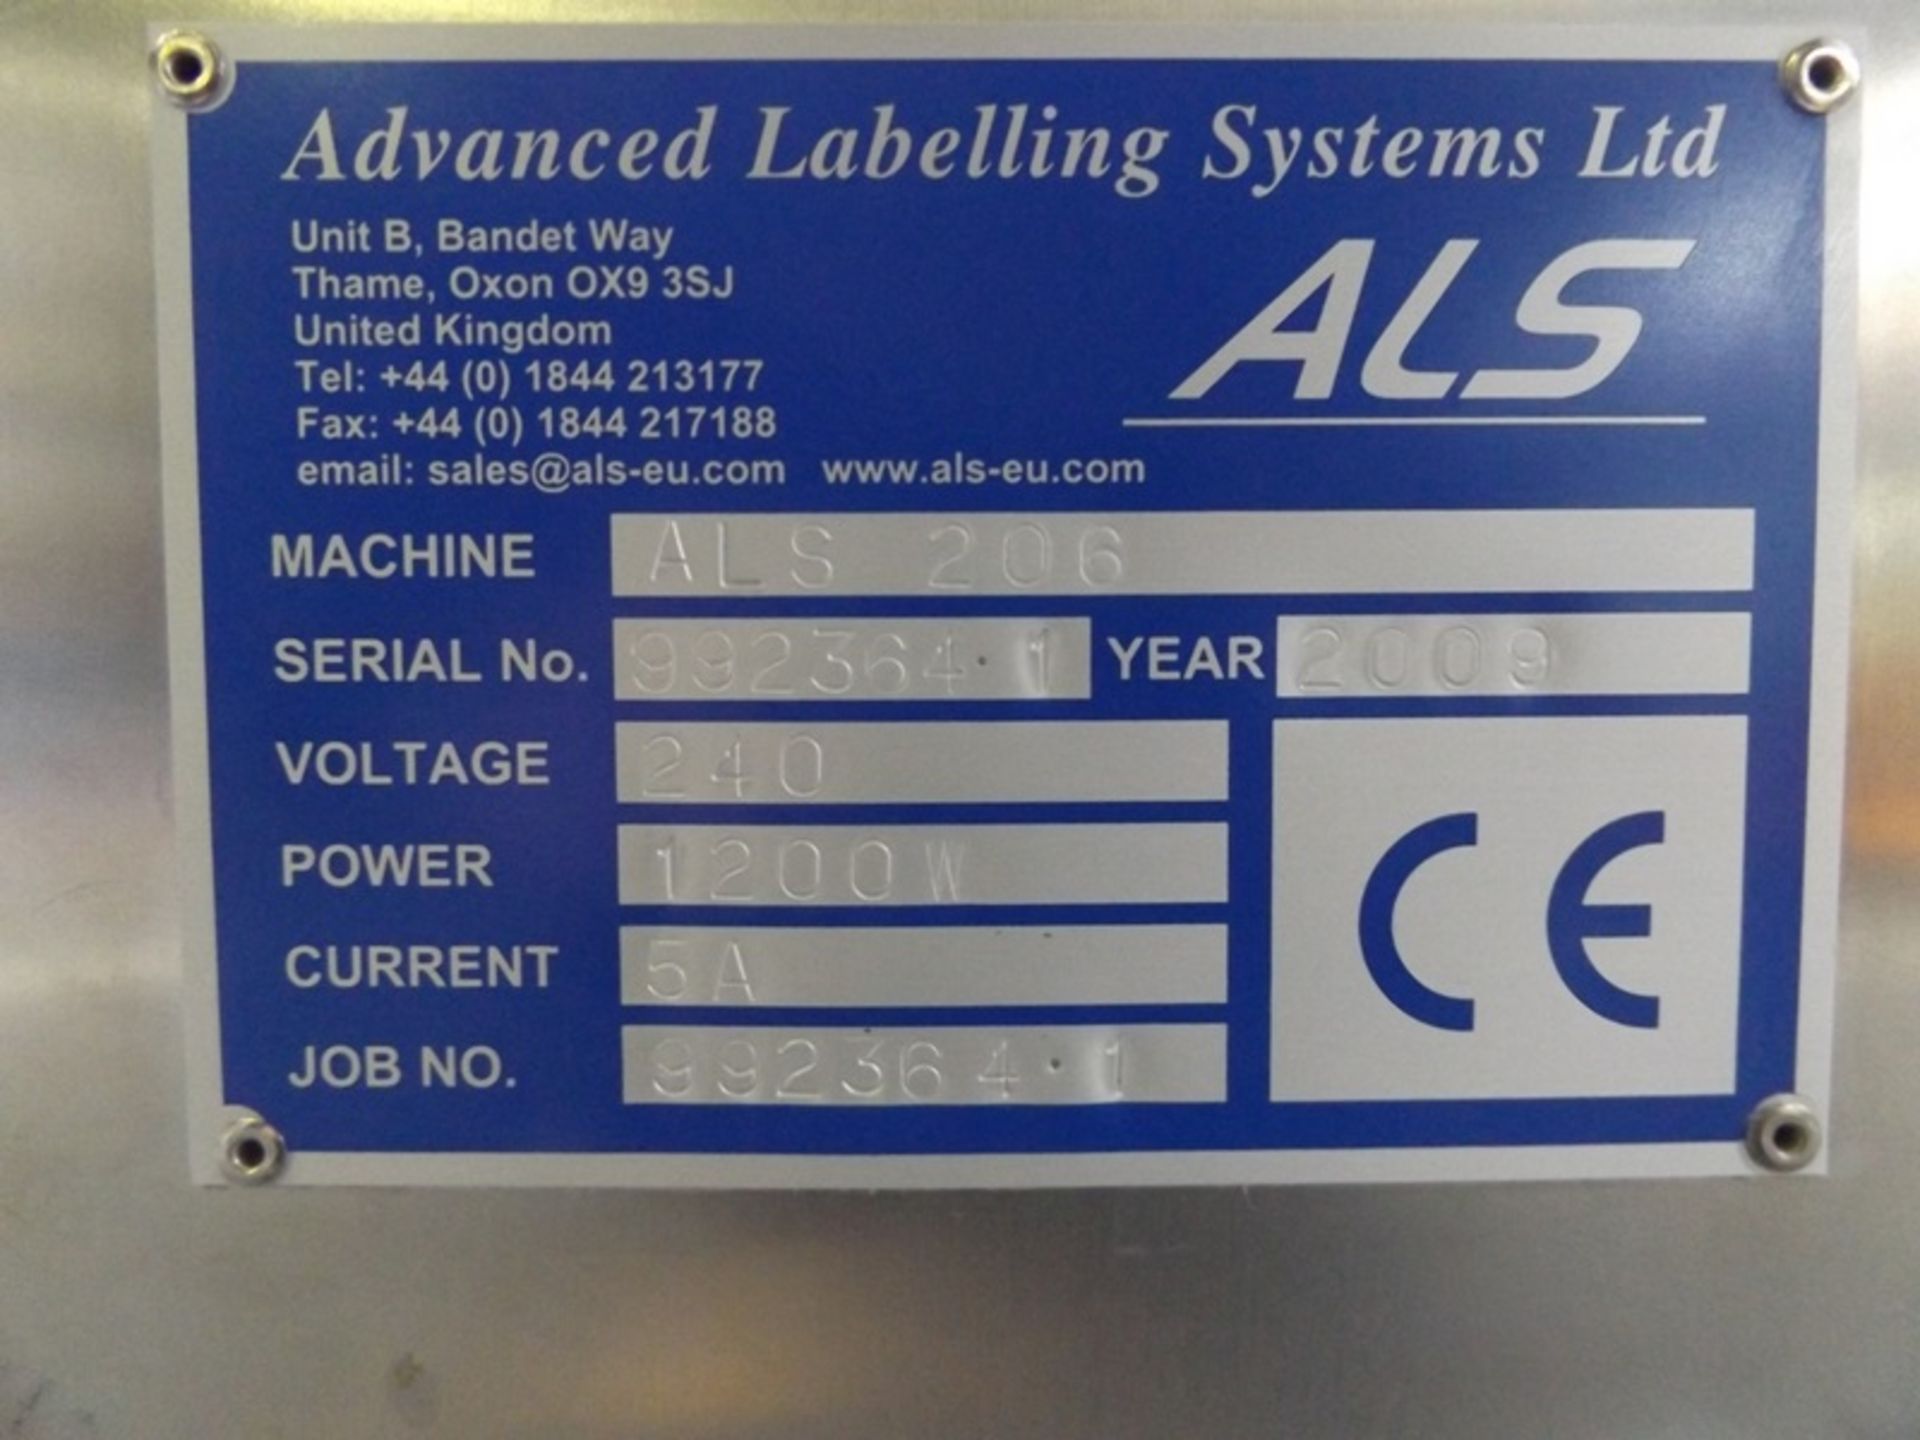 ALS 206 Top label applicator designed to apply self-adhesive labels and booklet labels to the top of - Image 19 of 20